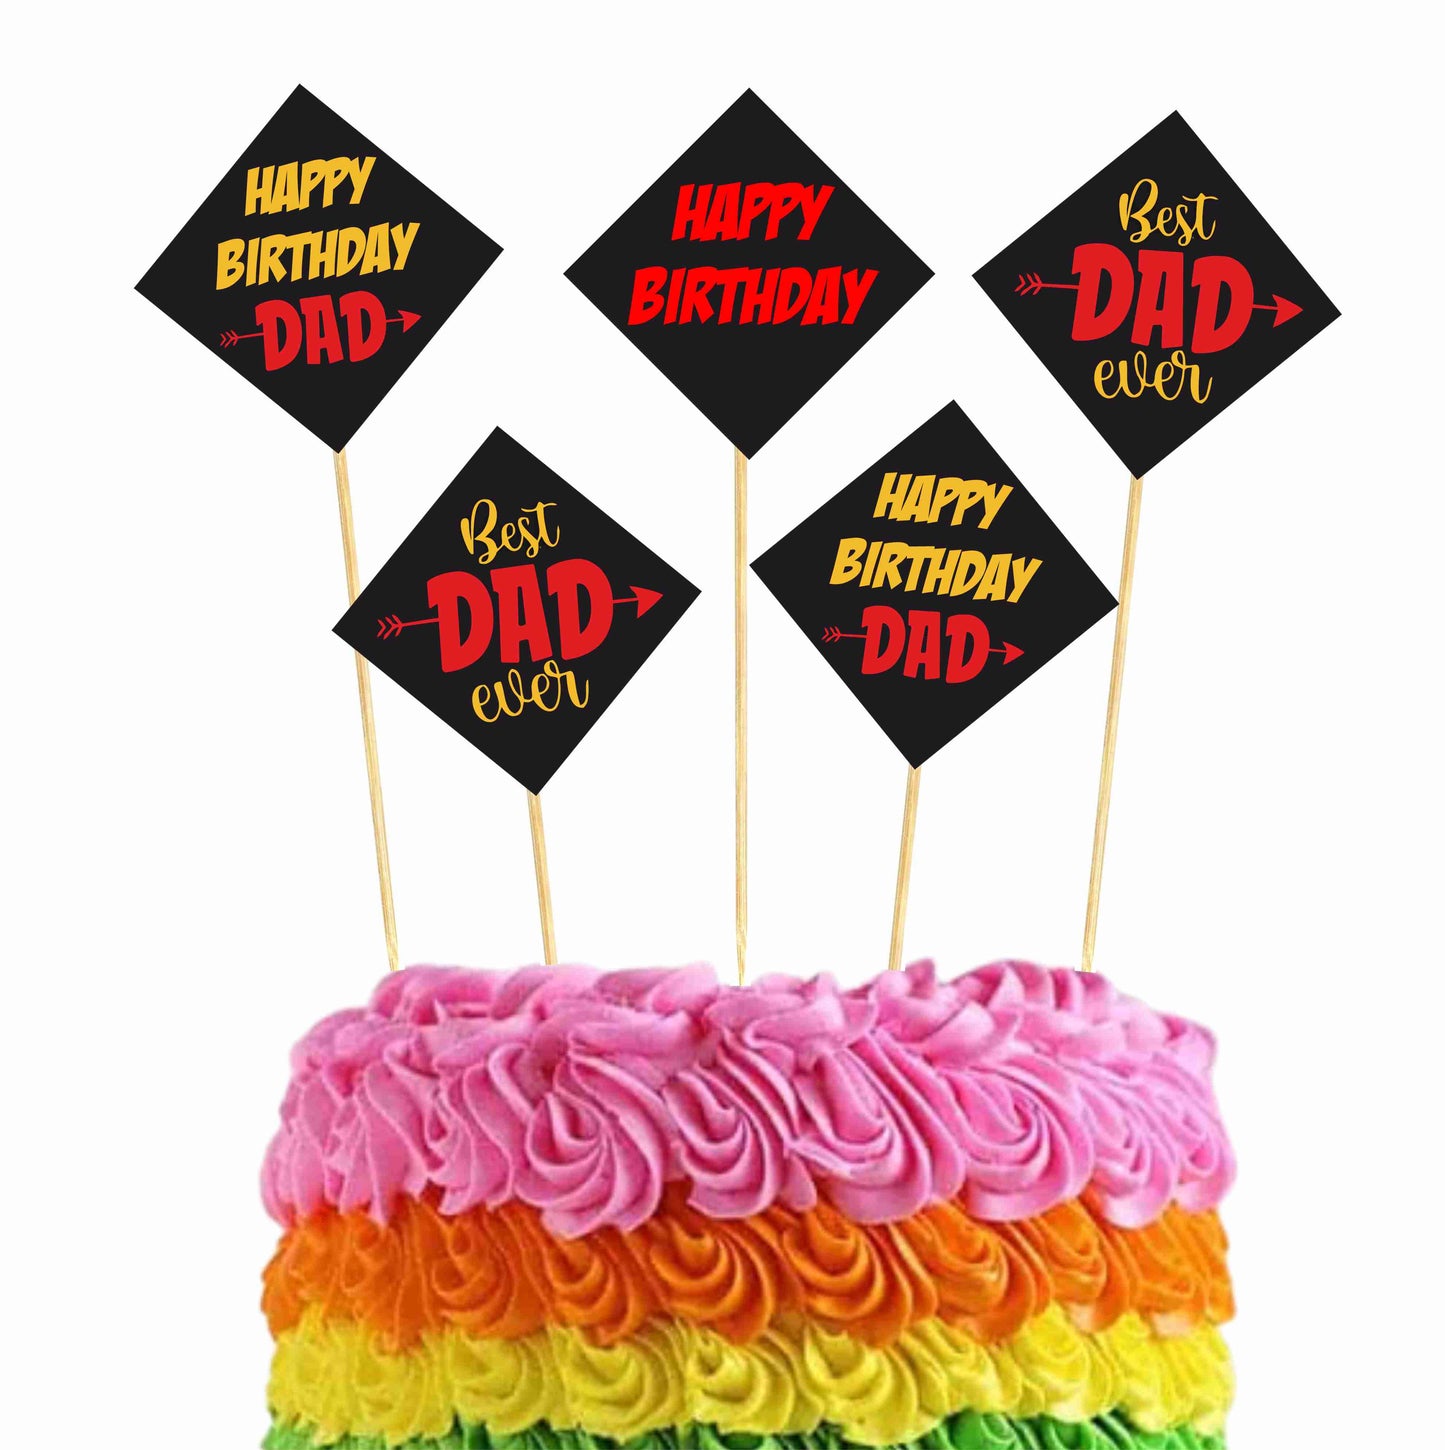 Happy Birthday Dad Cake Topper Pack of 10 Nos for Birthday Cake Decoration Theme Party Item